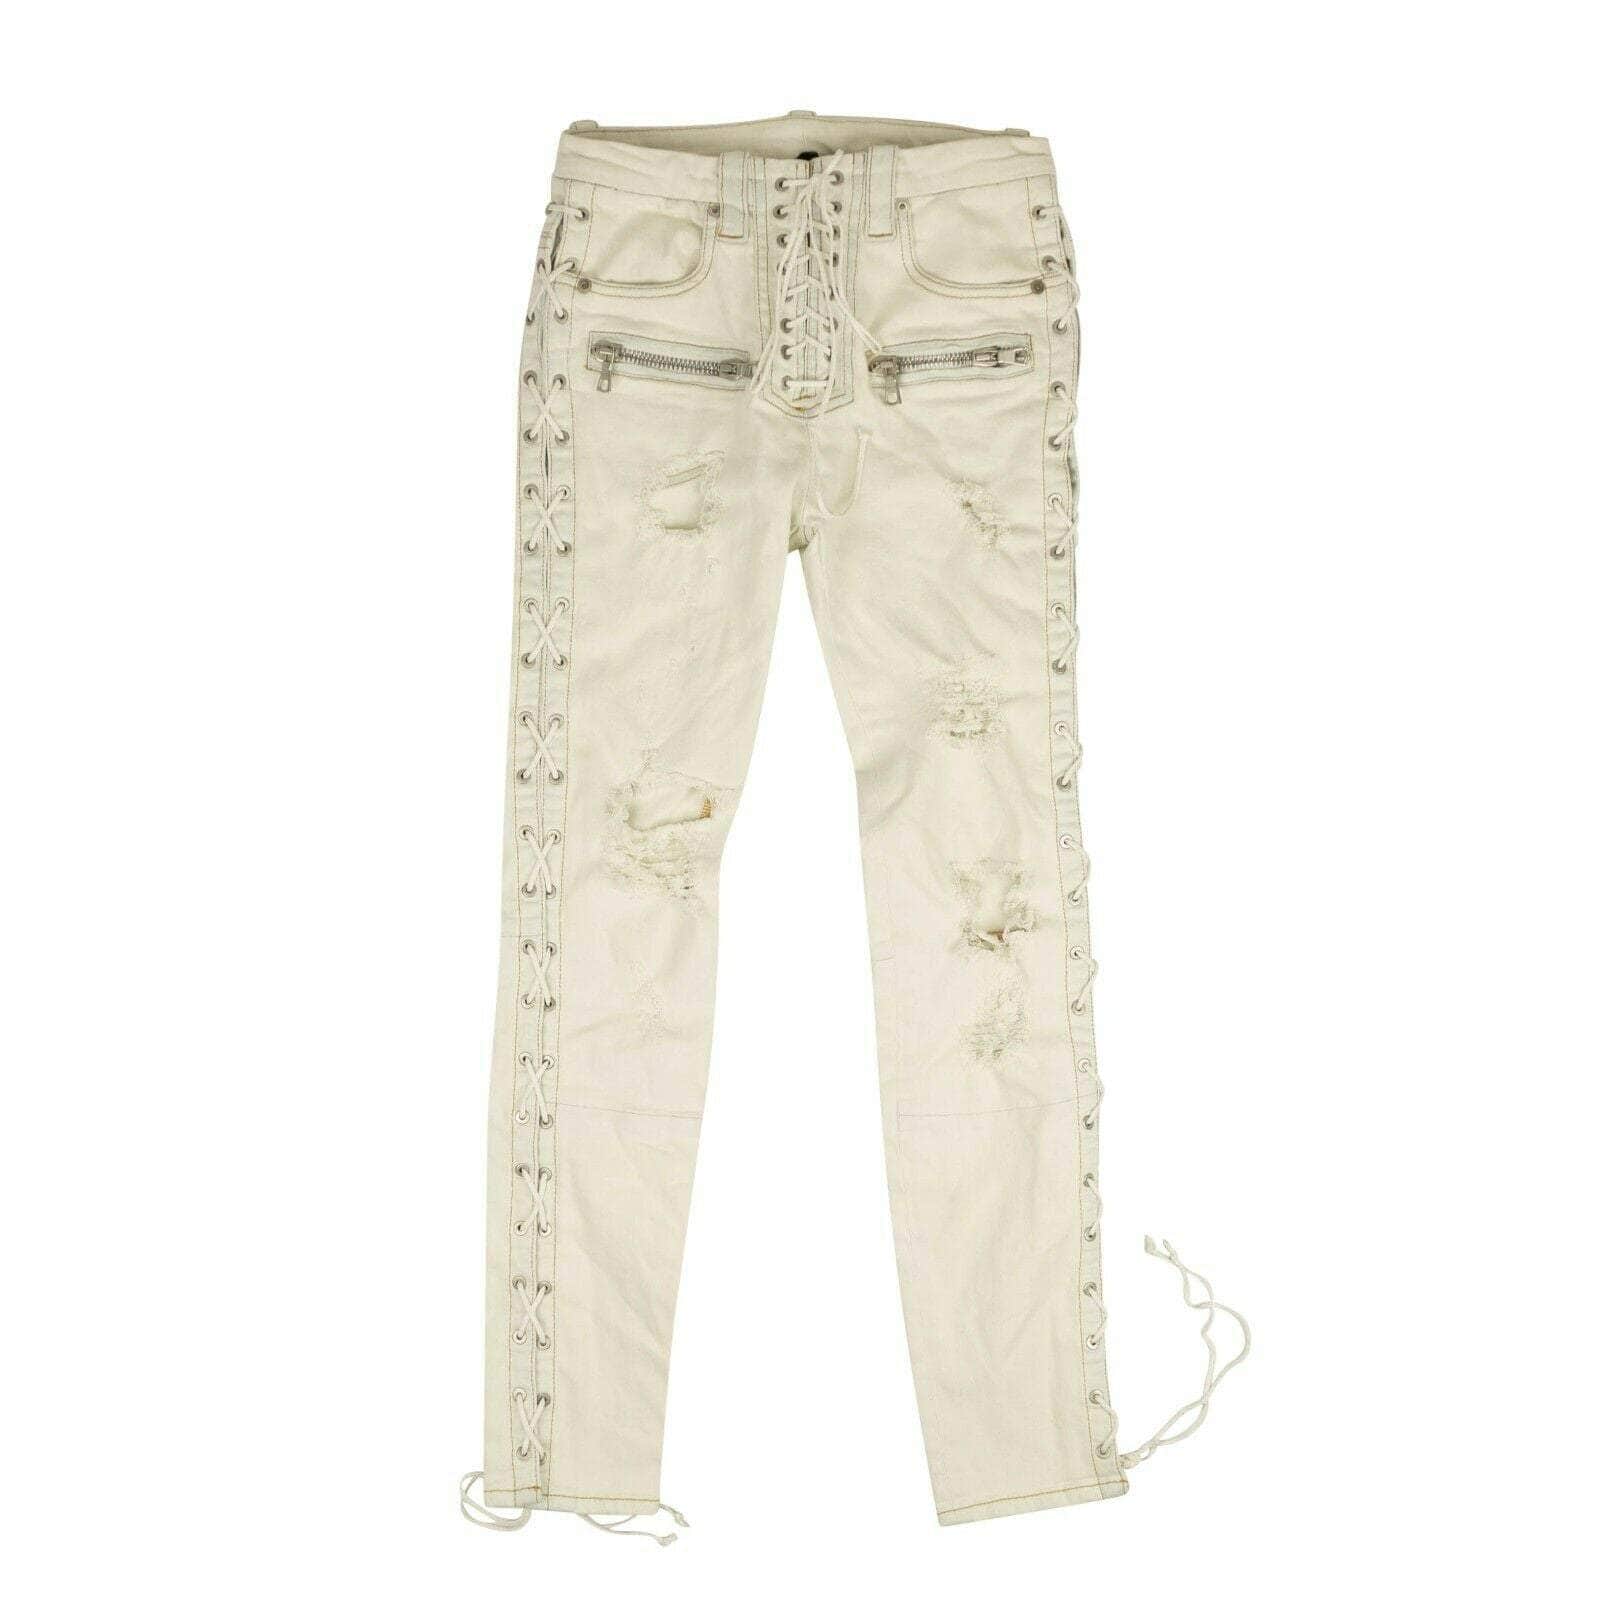 Unravel Project 250-500, channelenable-all, chicmi, couponcollection, gender-womens, main-clothing, size-24, size-25, unravel-project 25 White Washout Denim Side Lace Up Skinny Jeans 74NGG-UN-1204/25 74NGG-UN-1204/25